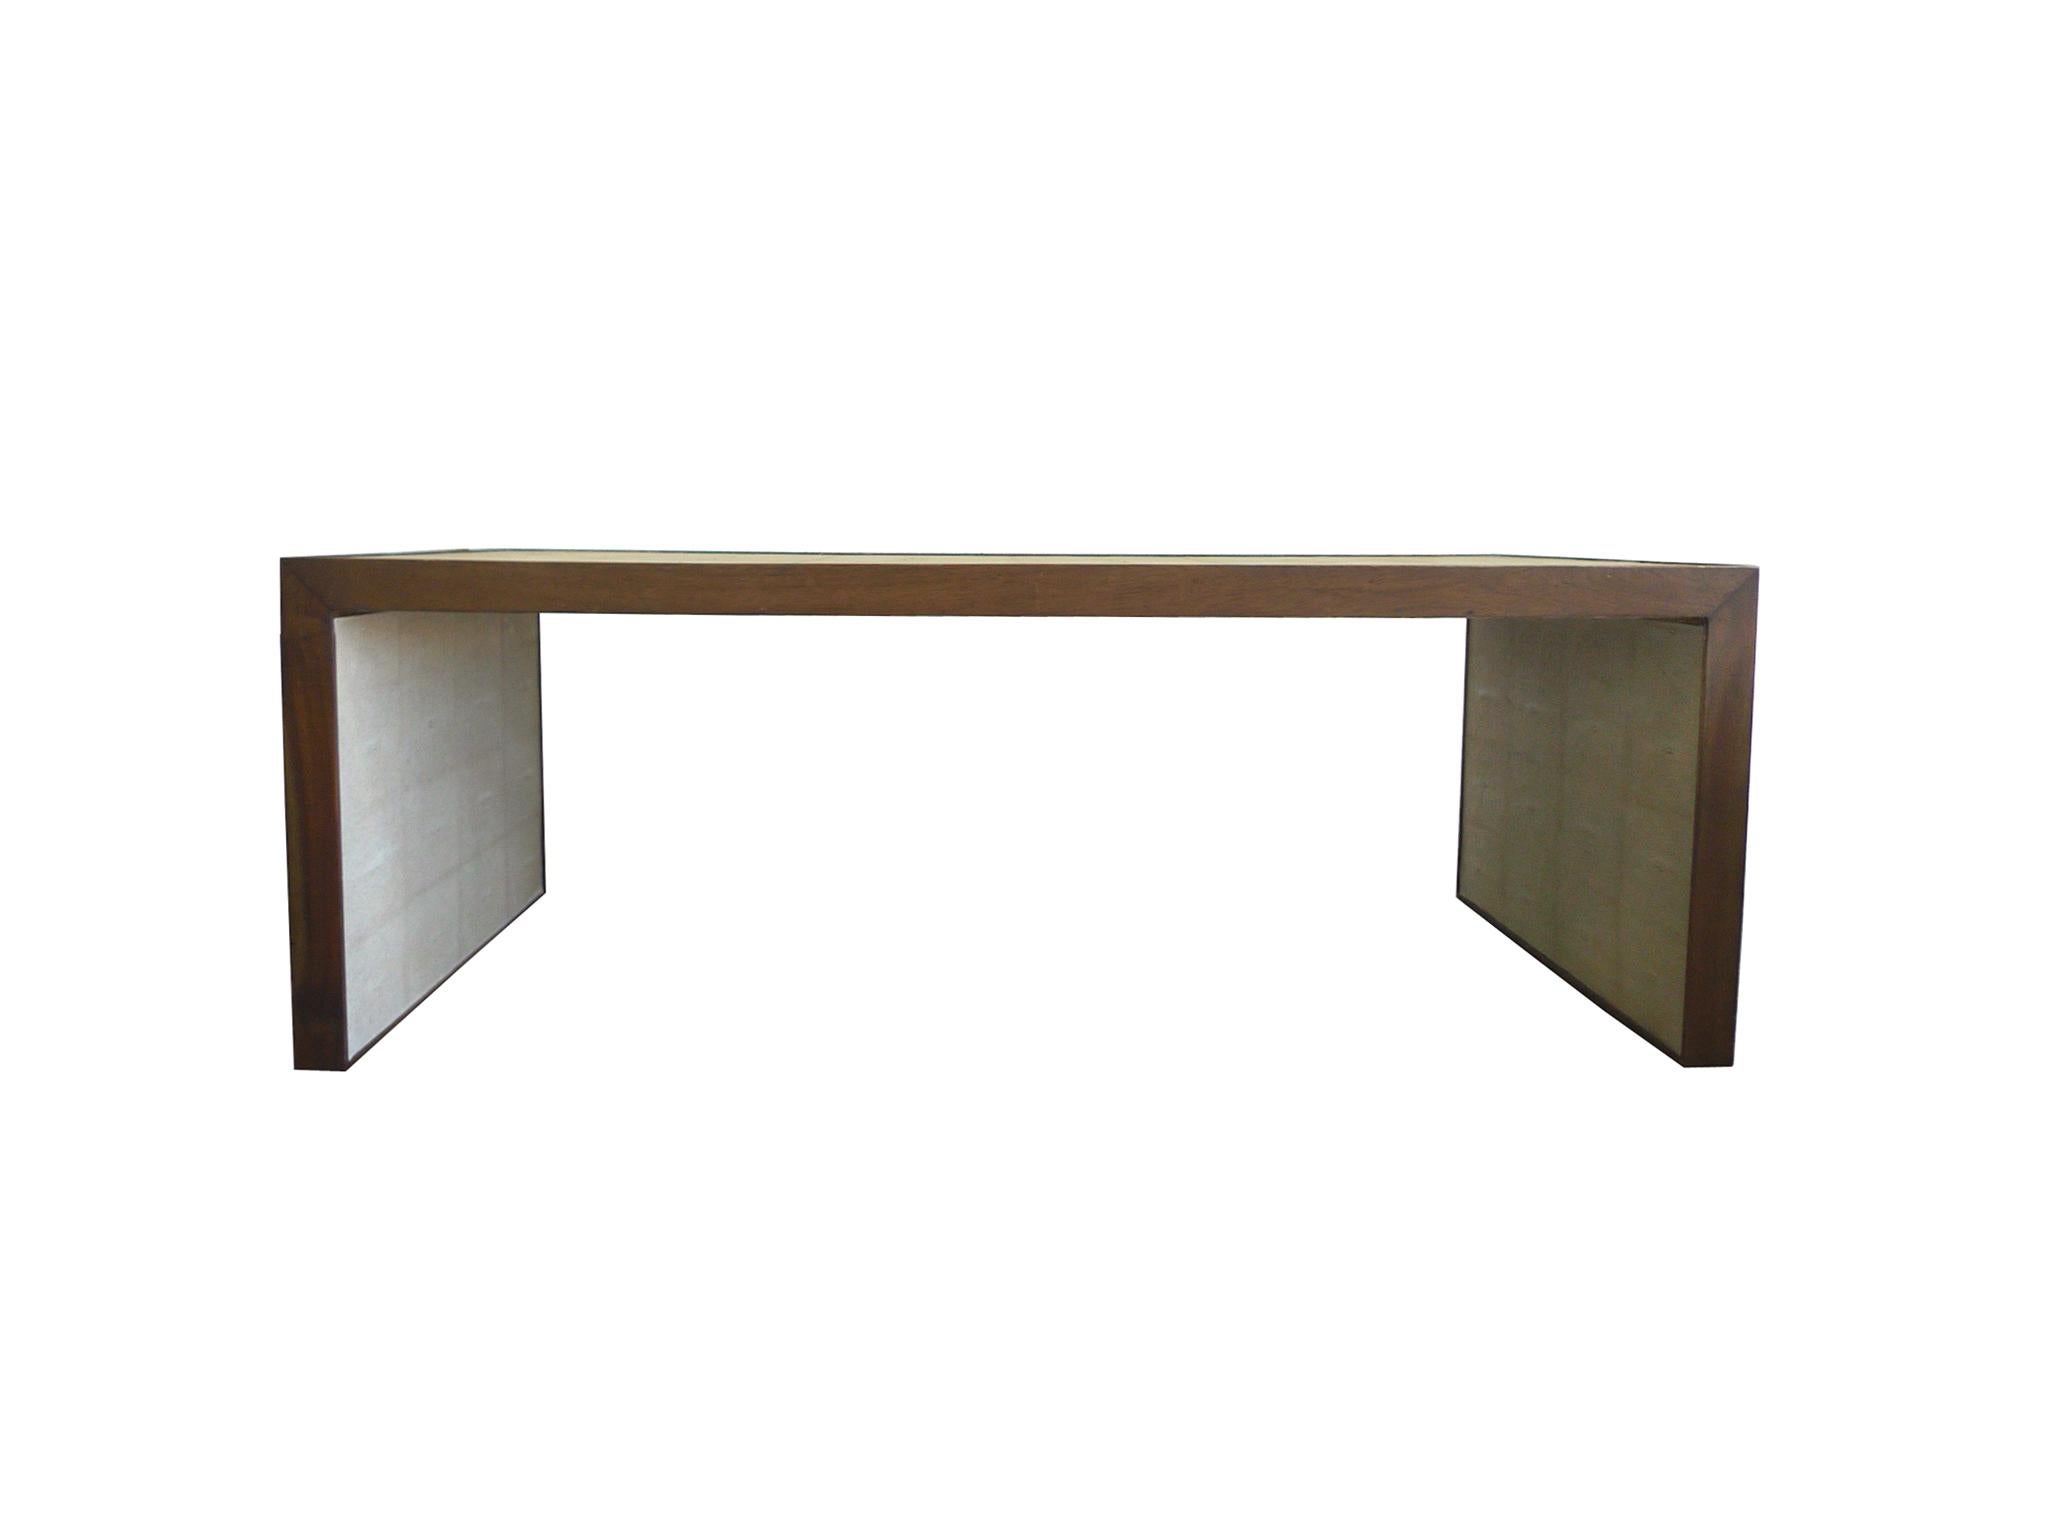 This handsome coffee table was made by Dwell Studios. It is comprised of a rectangular frame crafted from walnut and wrapped in a beige faux shagreen. The walnut is visible on the sides as an elegant brown trim. Simple in form and with smooth, sleek